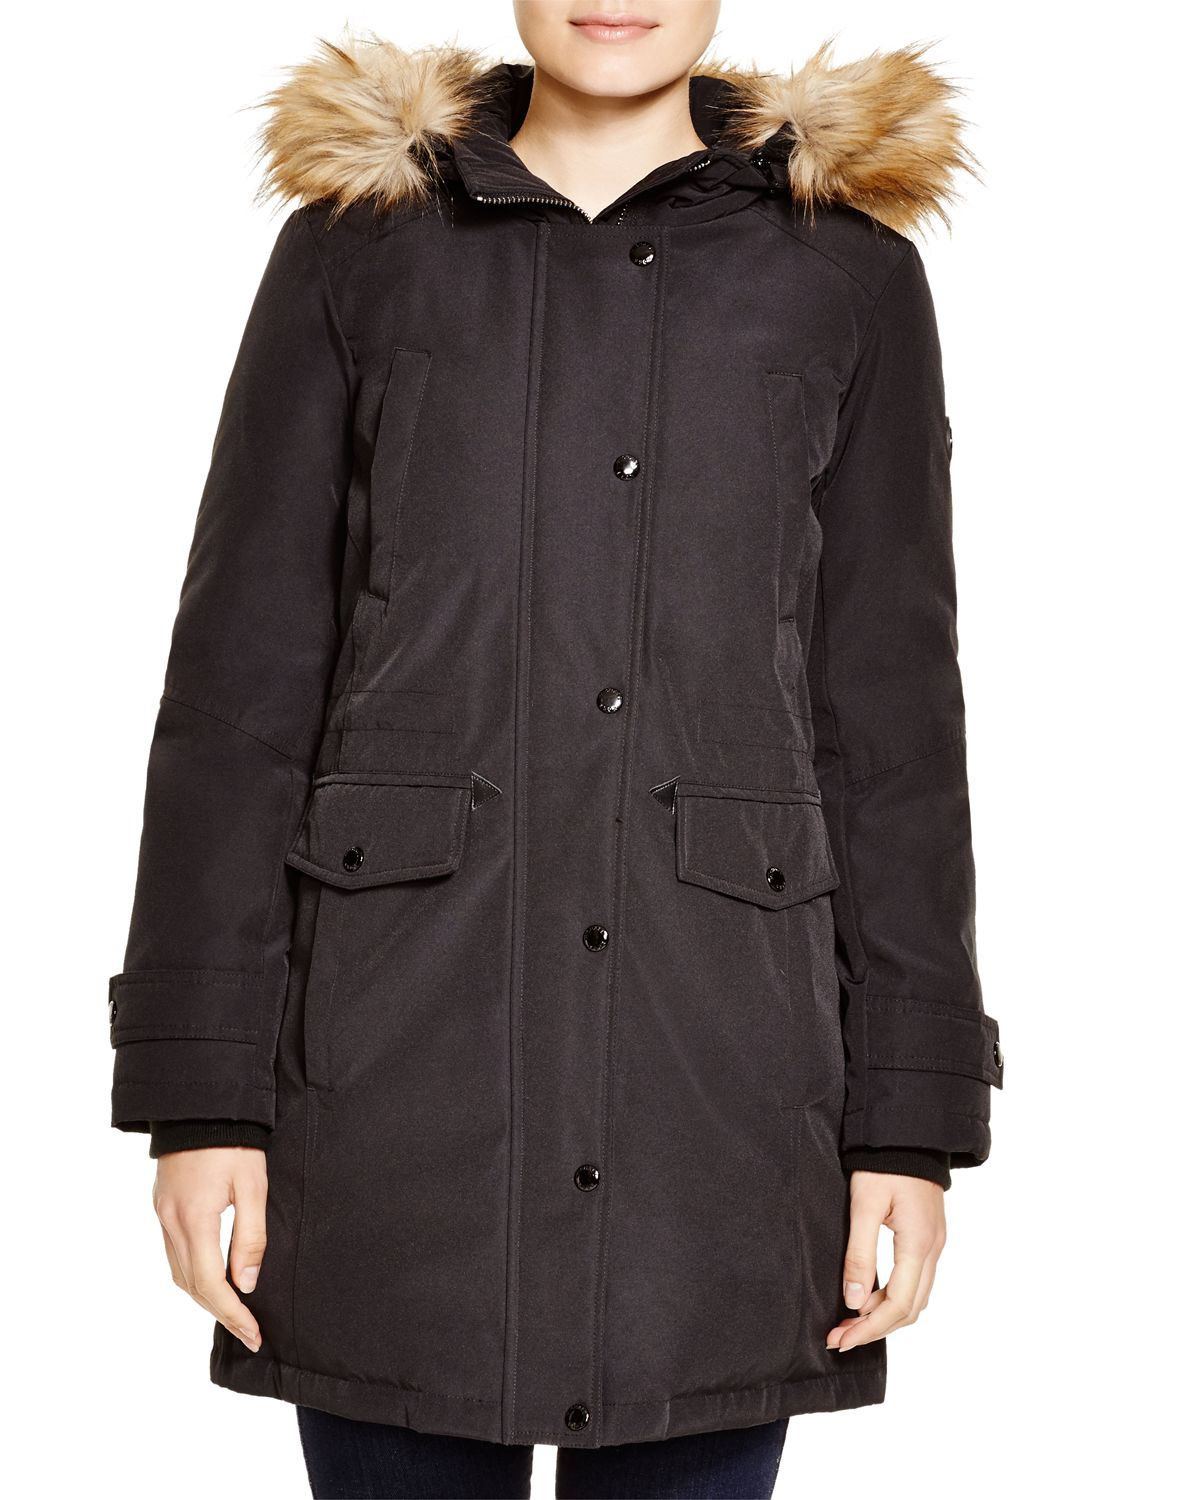 Lyst - Kors By Michael Kors Missy Parka With Faux-fur Trim in Black